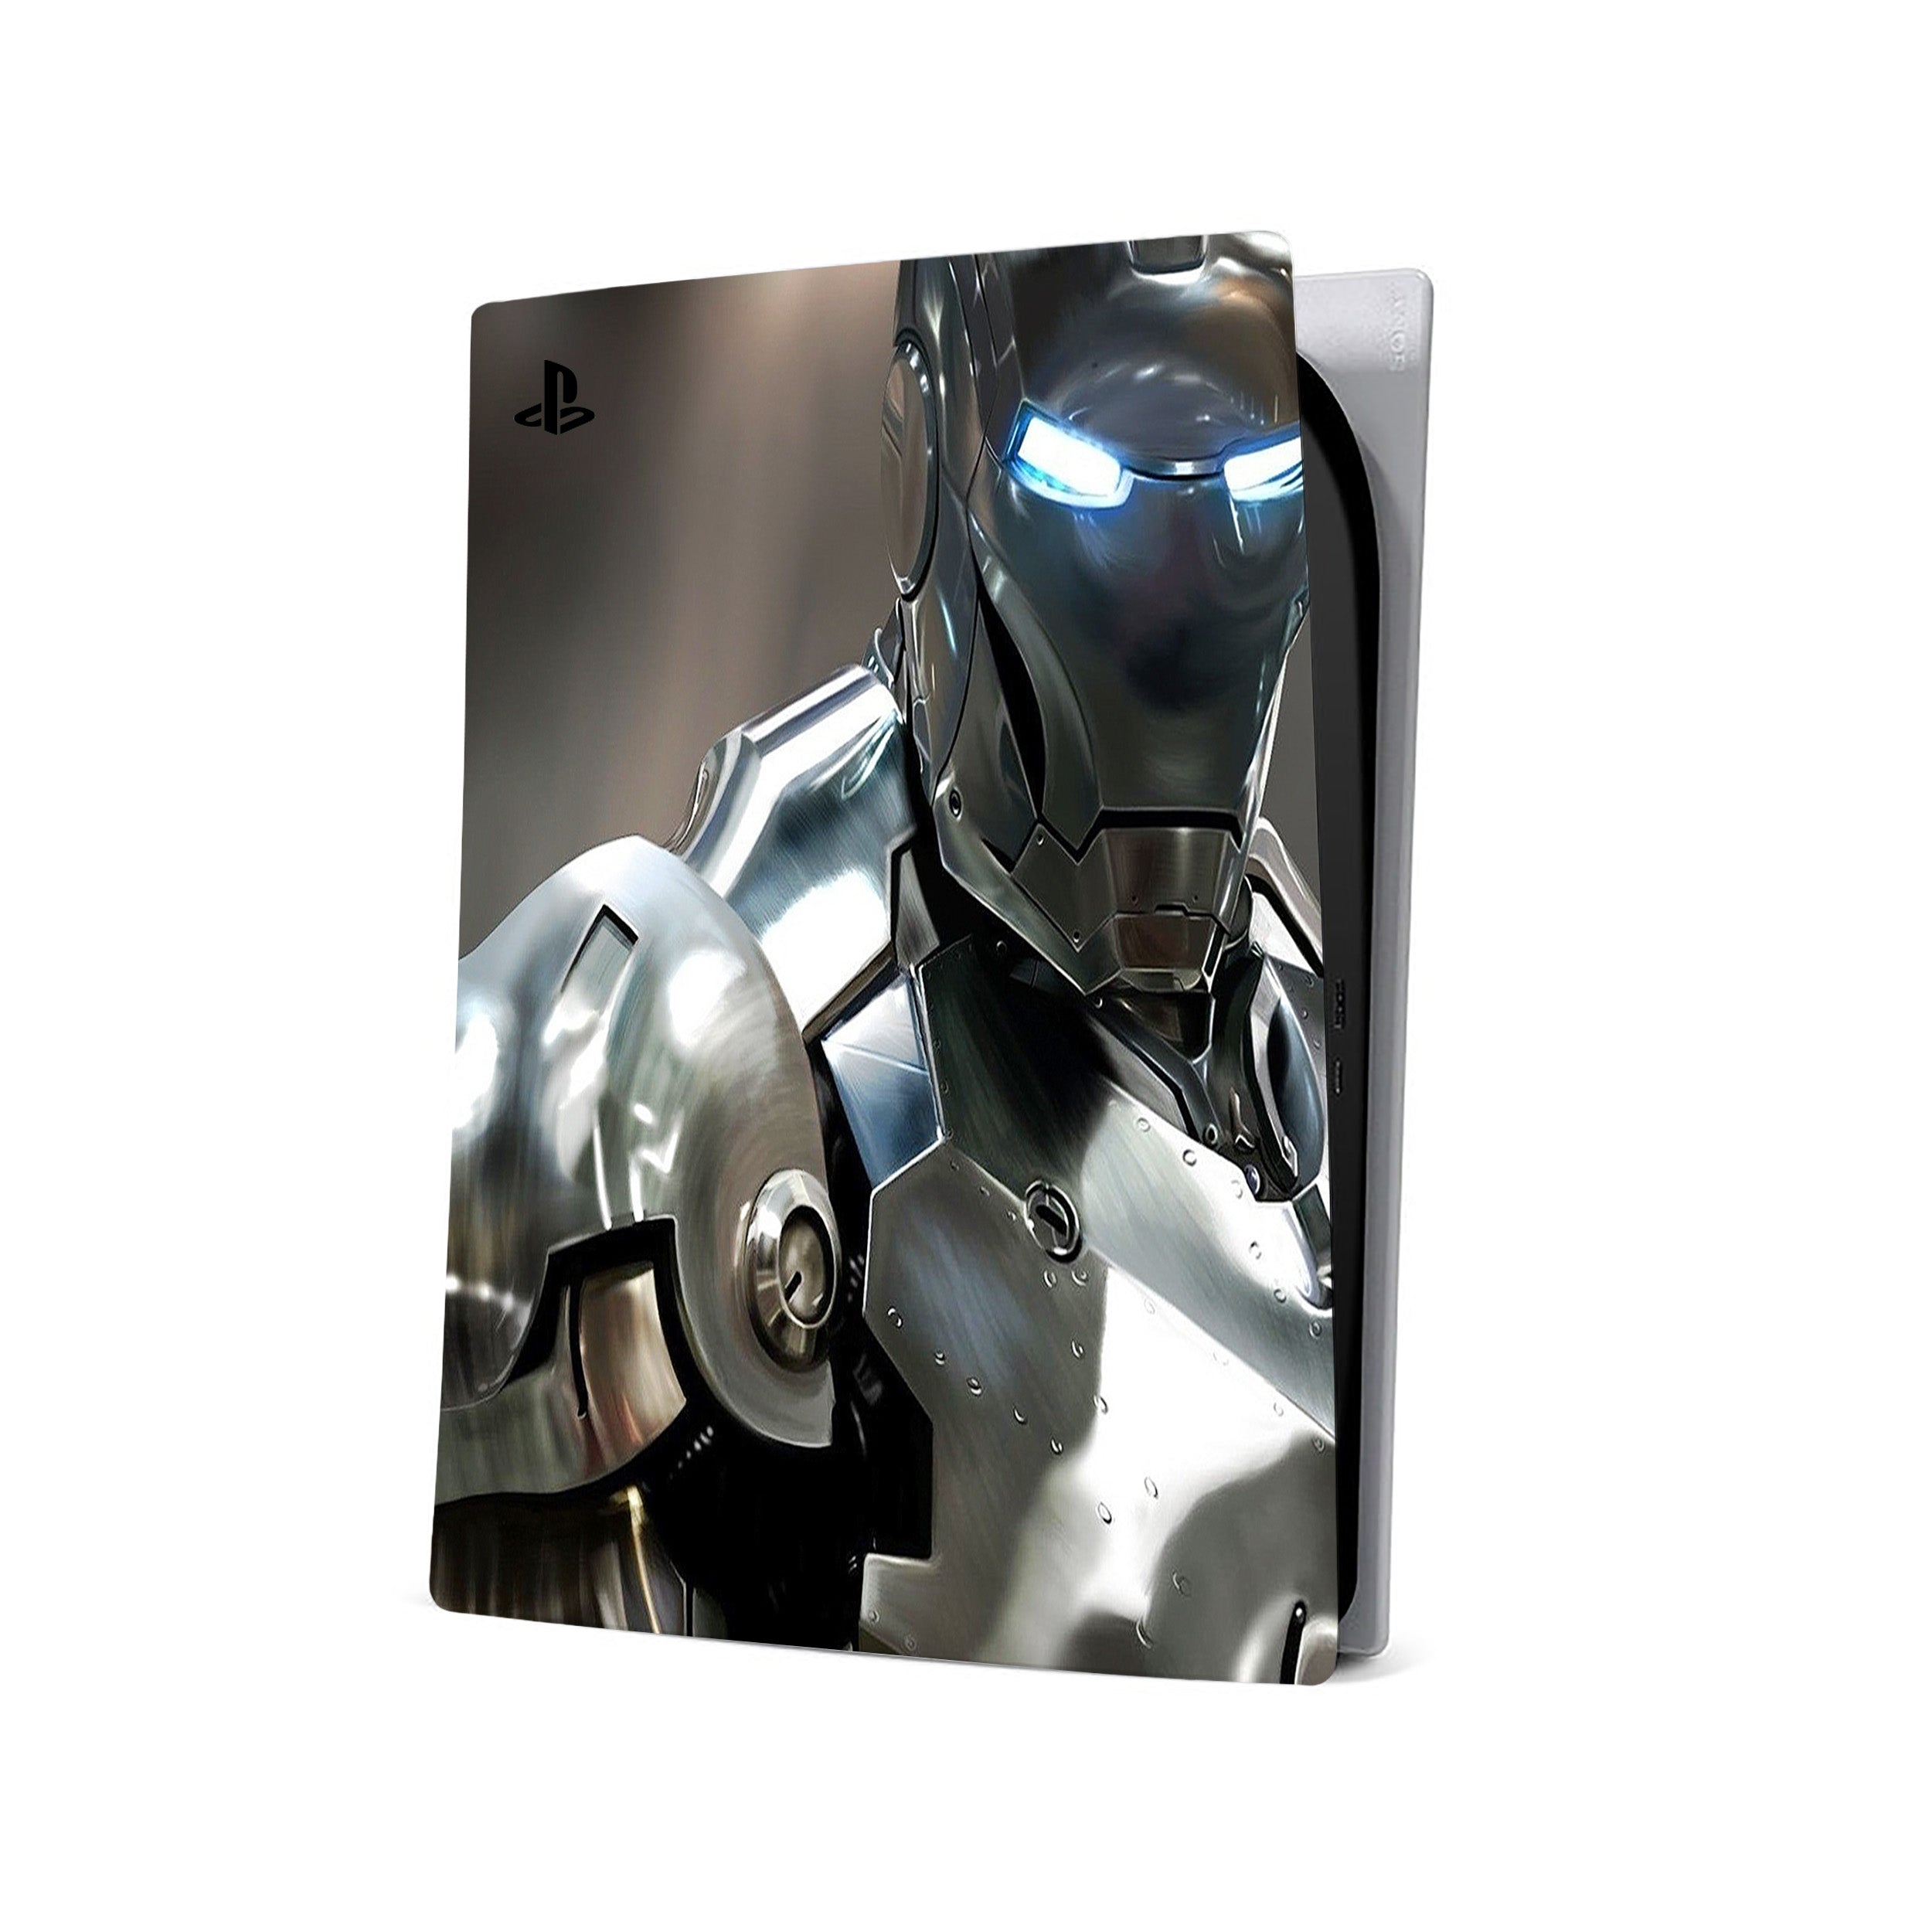 A video game skin featuring a Marvel Iron Man design for the PS5.